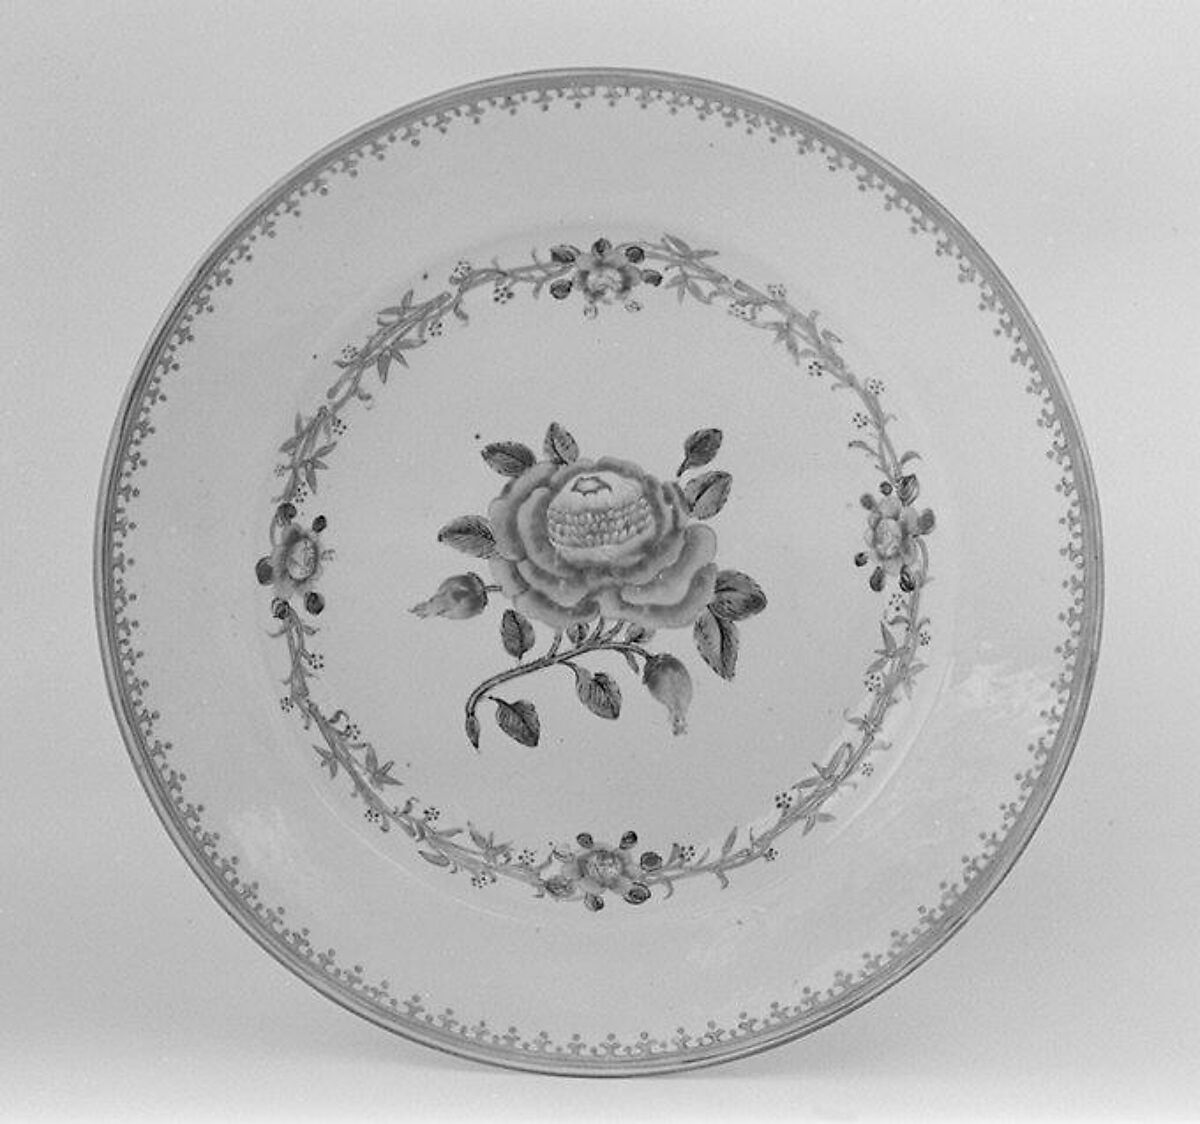 Plate (one of two), Hard-paste porcelain, Chinese, possibly for Continental European market 